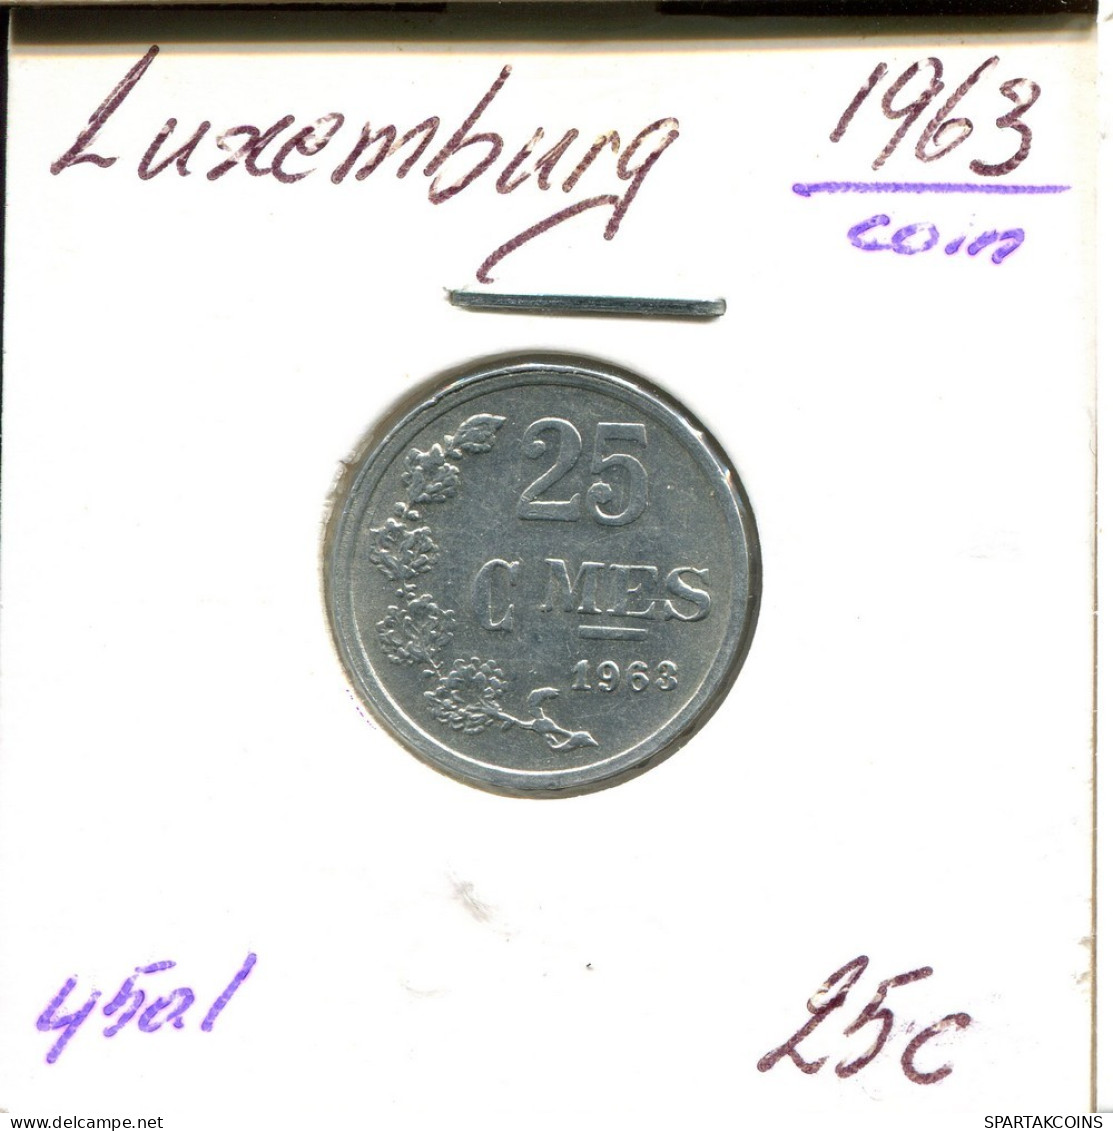 25 CENTIMES 1963 LUXEMBURG LUXEMBOURG Münze #AT193.D.A - Luxemburg